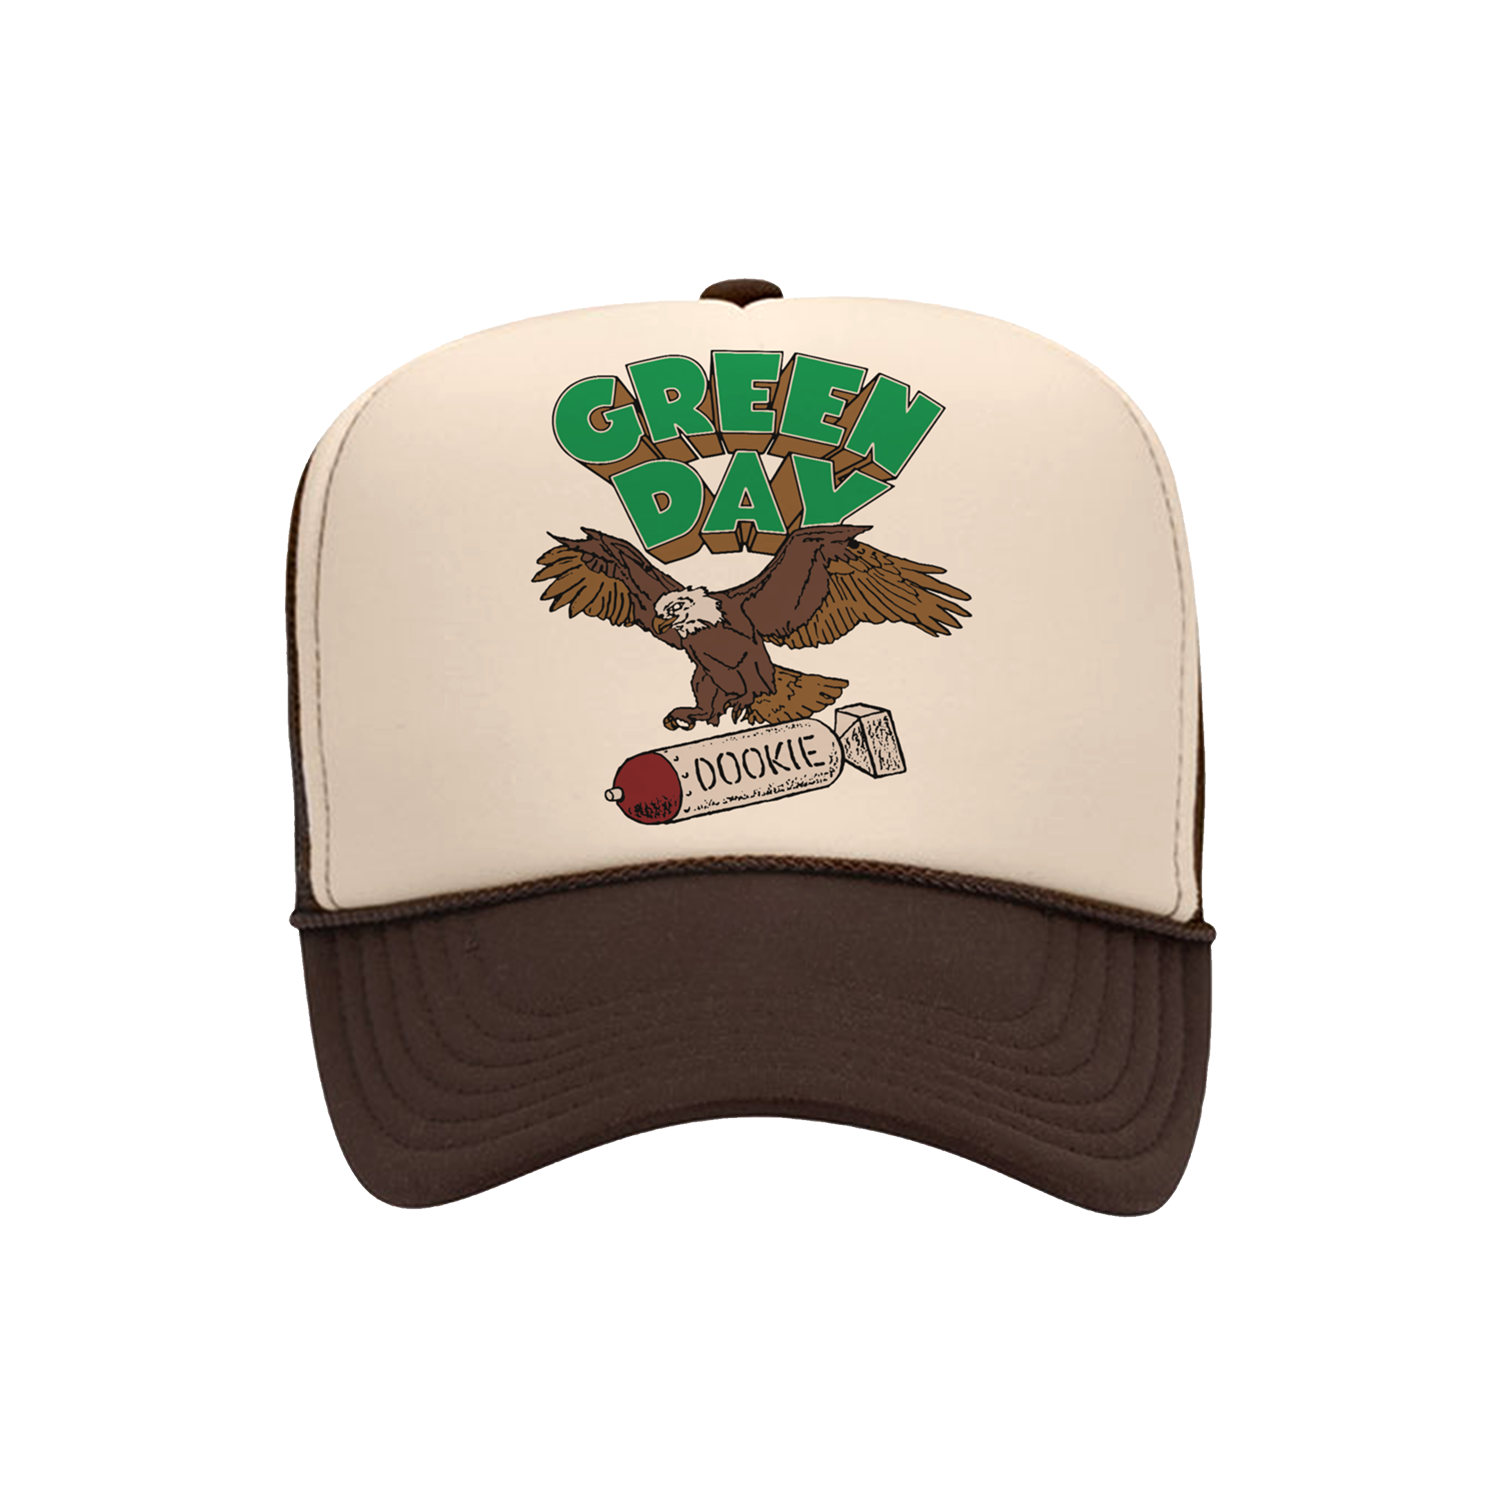 https://store.greenday.com/on/demandware.static/-/Sites-warner-master/default/dw4bec07f5/pdp-img/Green%20Day/accessory/Dookie%20Eagle%20Trucker%20Hat.png